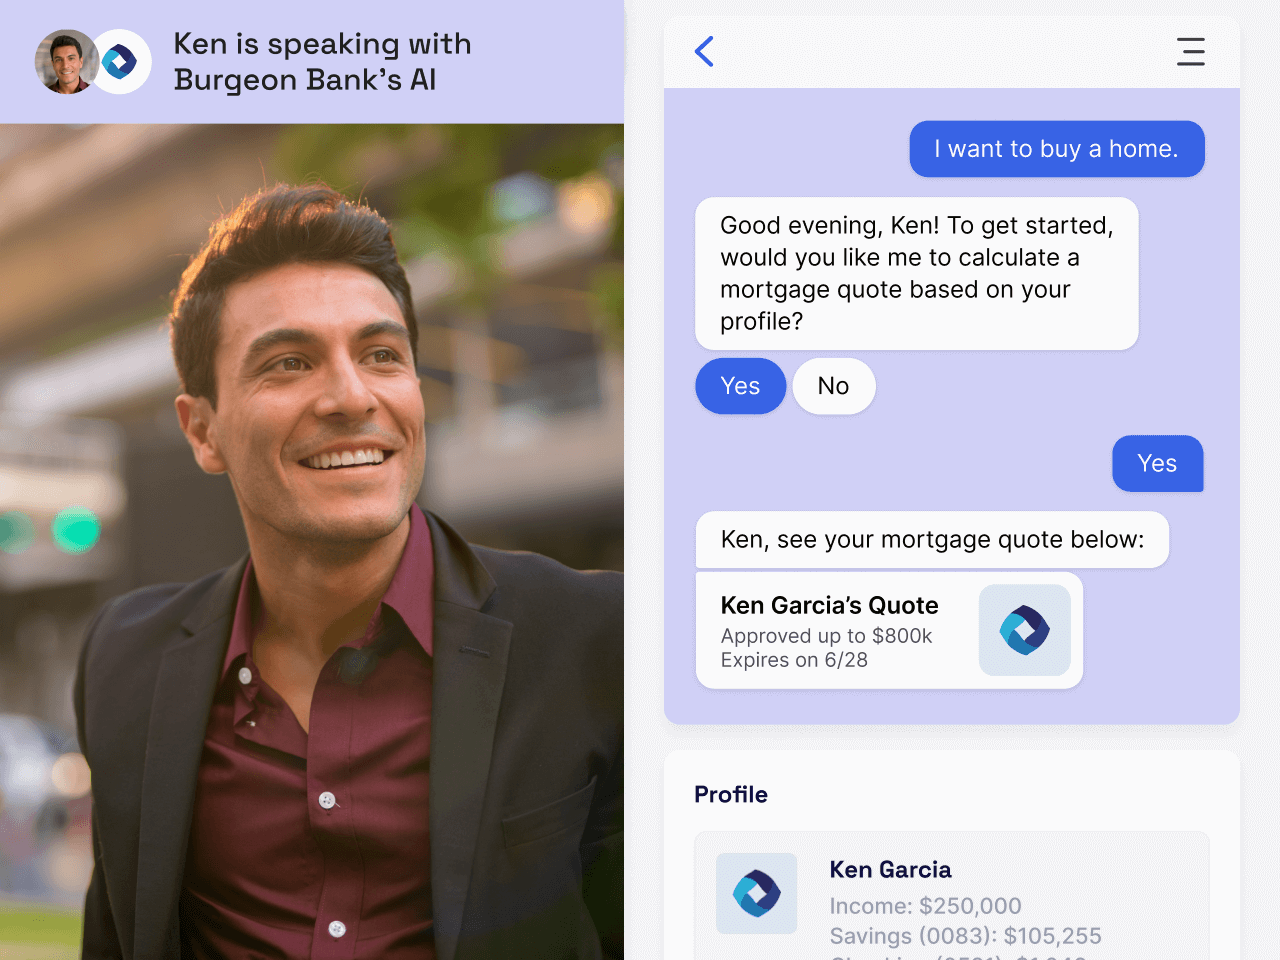 Banking chatbot providing mortgage quote via a messaging communication channel